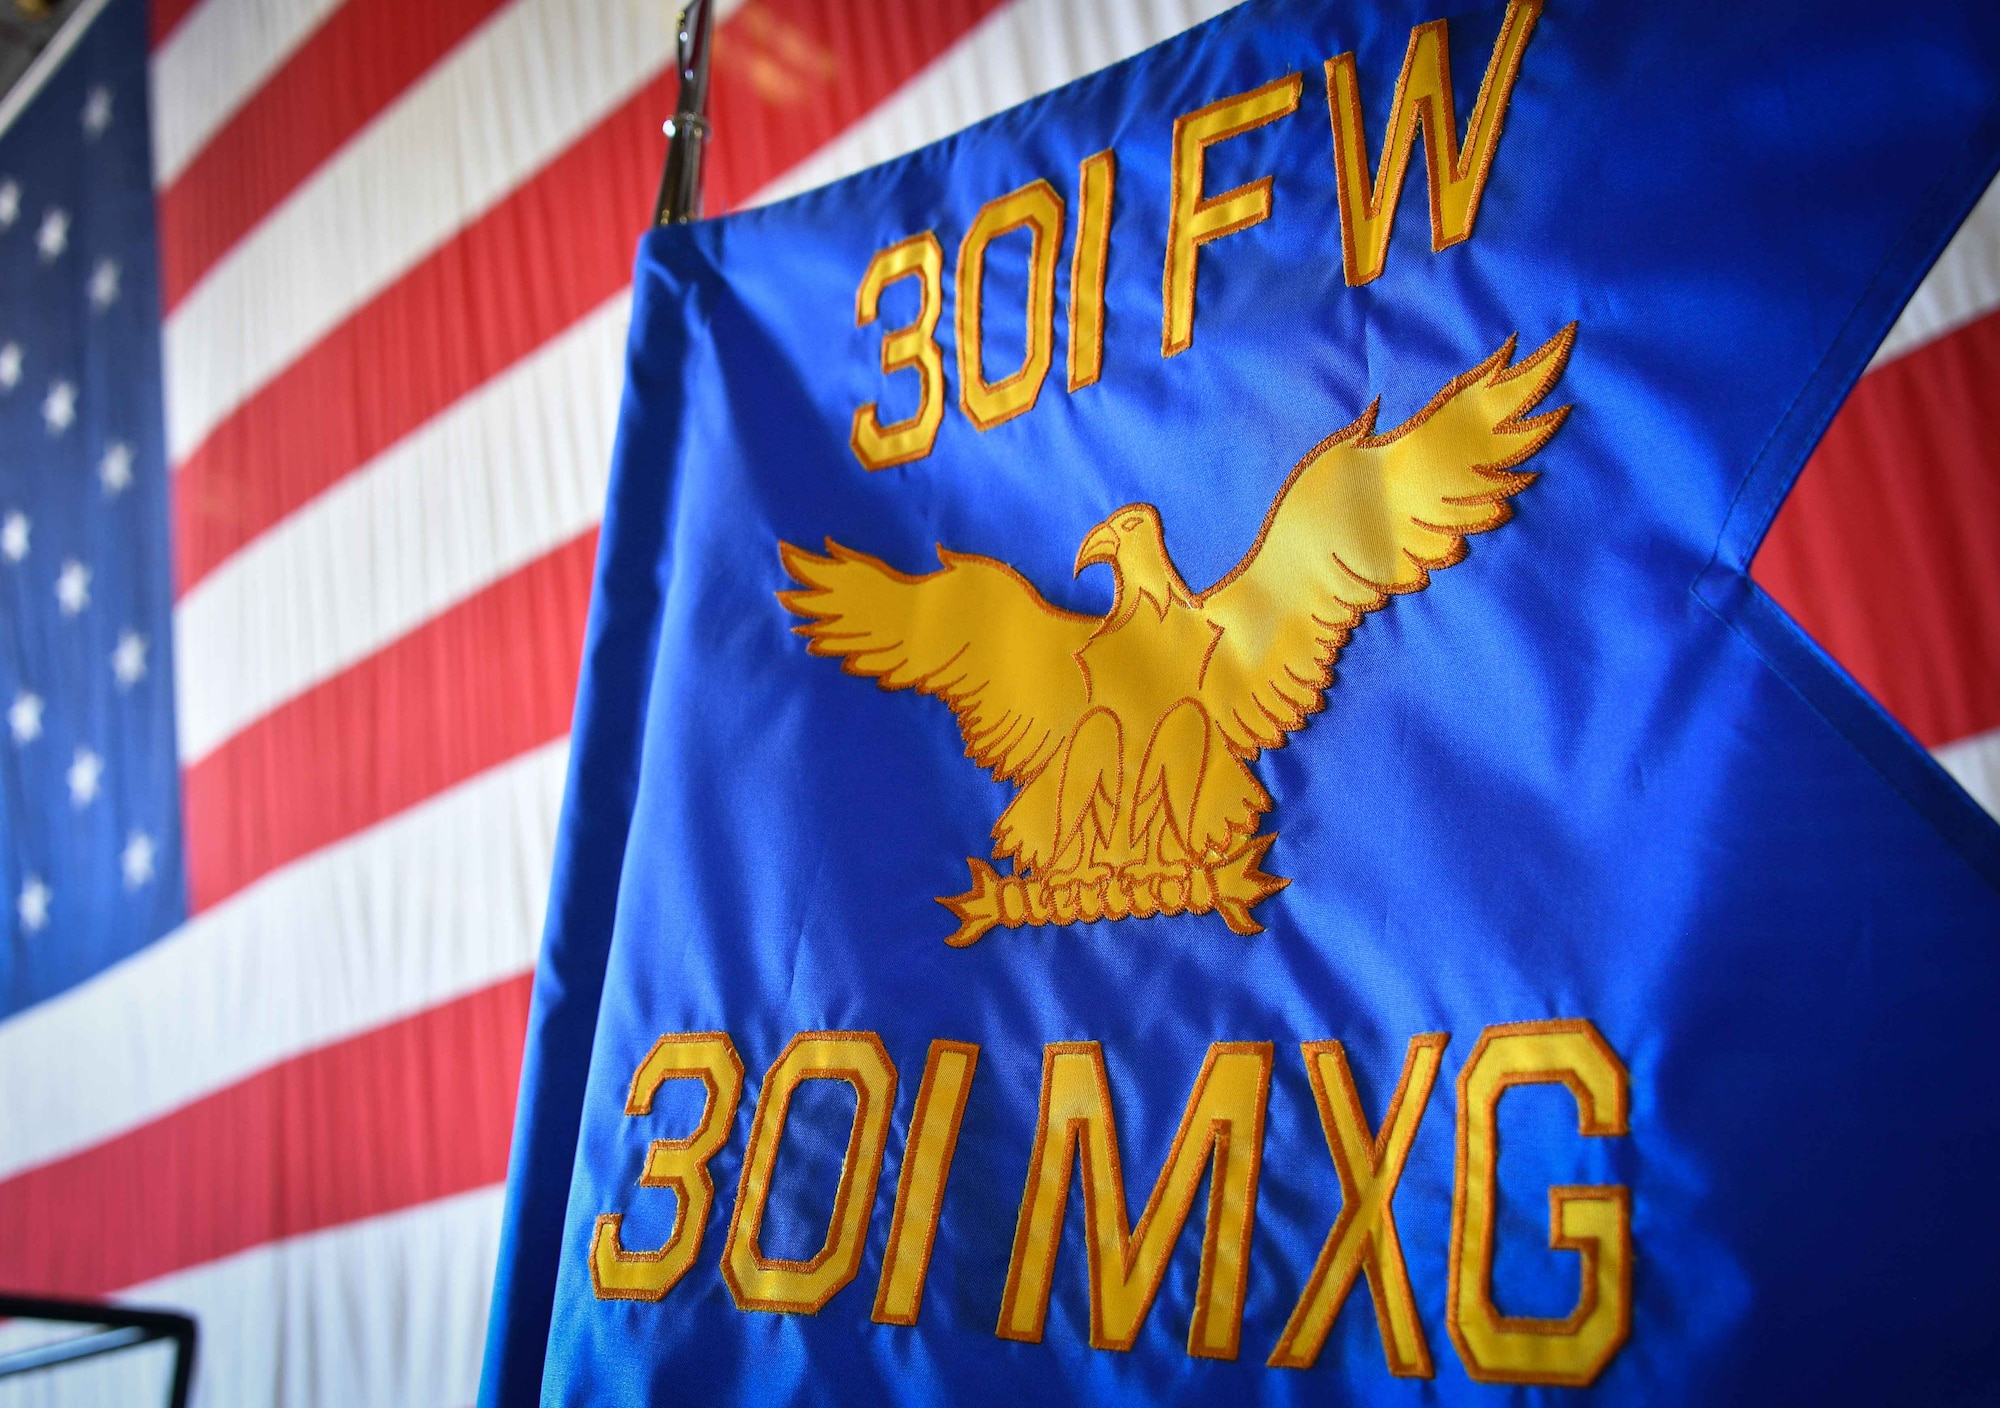 This 301 FW Maintenance Group guideon was given to Col. John Nemecek, the incoming 301 FW MXG commander, August 8, 2021, during at change of command ceremony at U.S. Naval Air Station Joint Reserve Base Fort Worth, Texas. This military tradition symbolizes the transfer of unchallenged authority passed to the new commander to lead their unit. (U.S. Air Force photo by Master Sgt. Jeremy Roman)